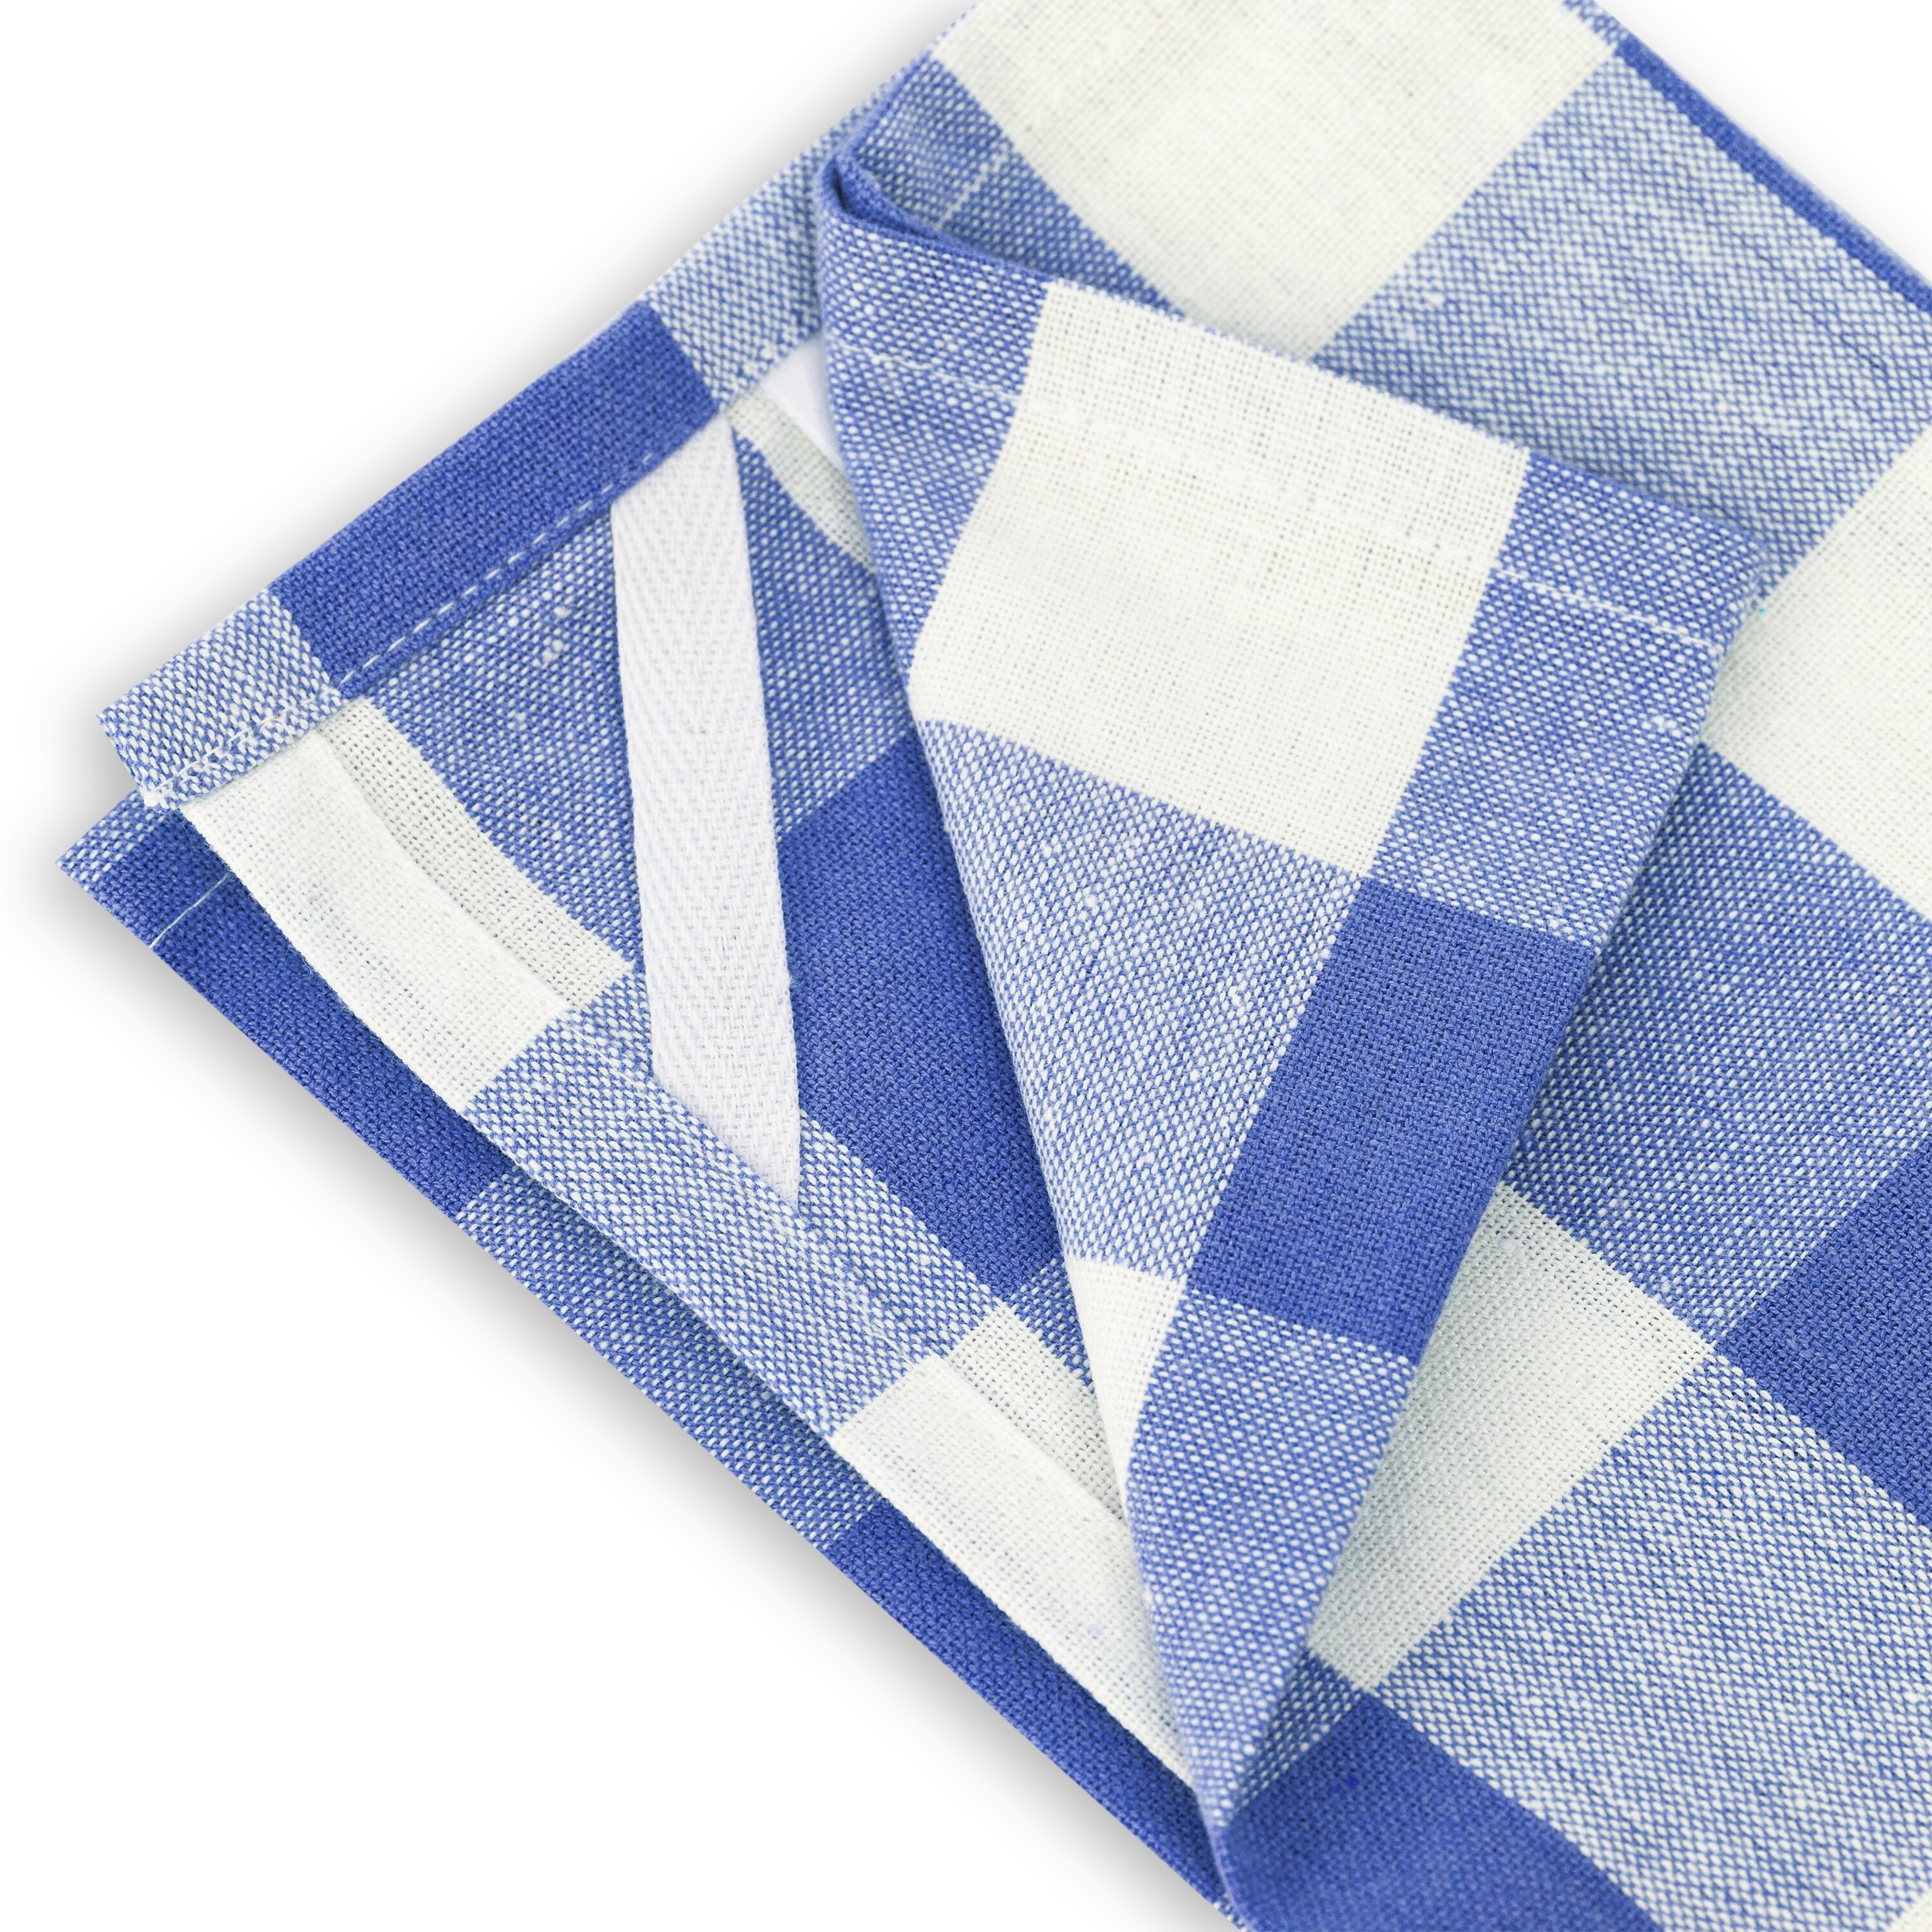 https://ak1.ostkcdn.com/images/products/is/images/direct/ef90f78ff2ffb66b53e1d8e2d7cdc948436d9b10/Fabstyles-Country-Check-Cotton-Kitchen-Towel-Set-of-4.jpg